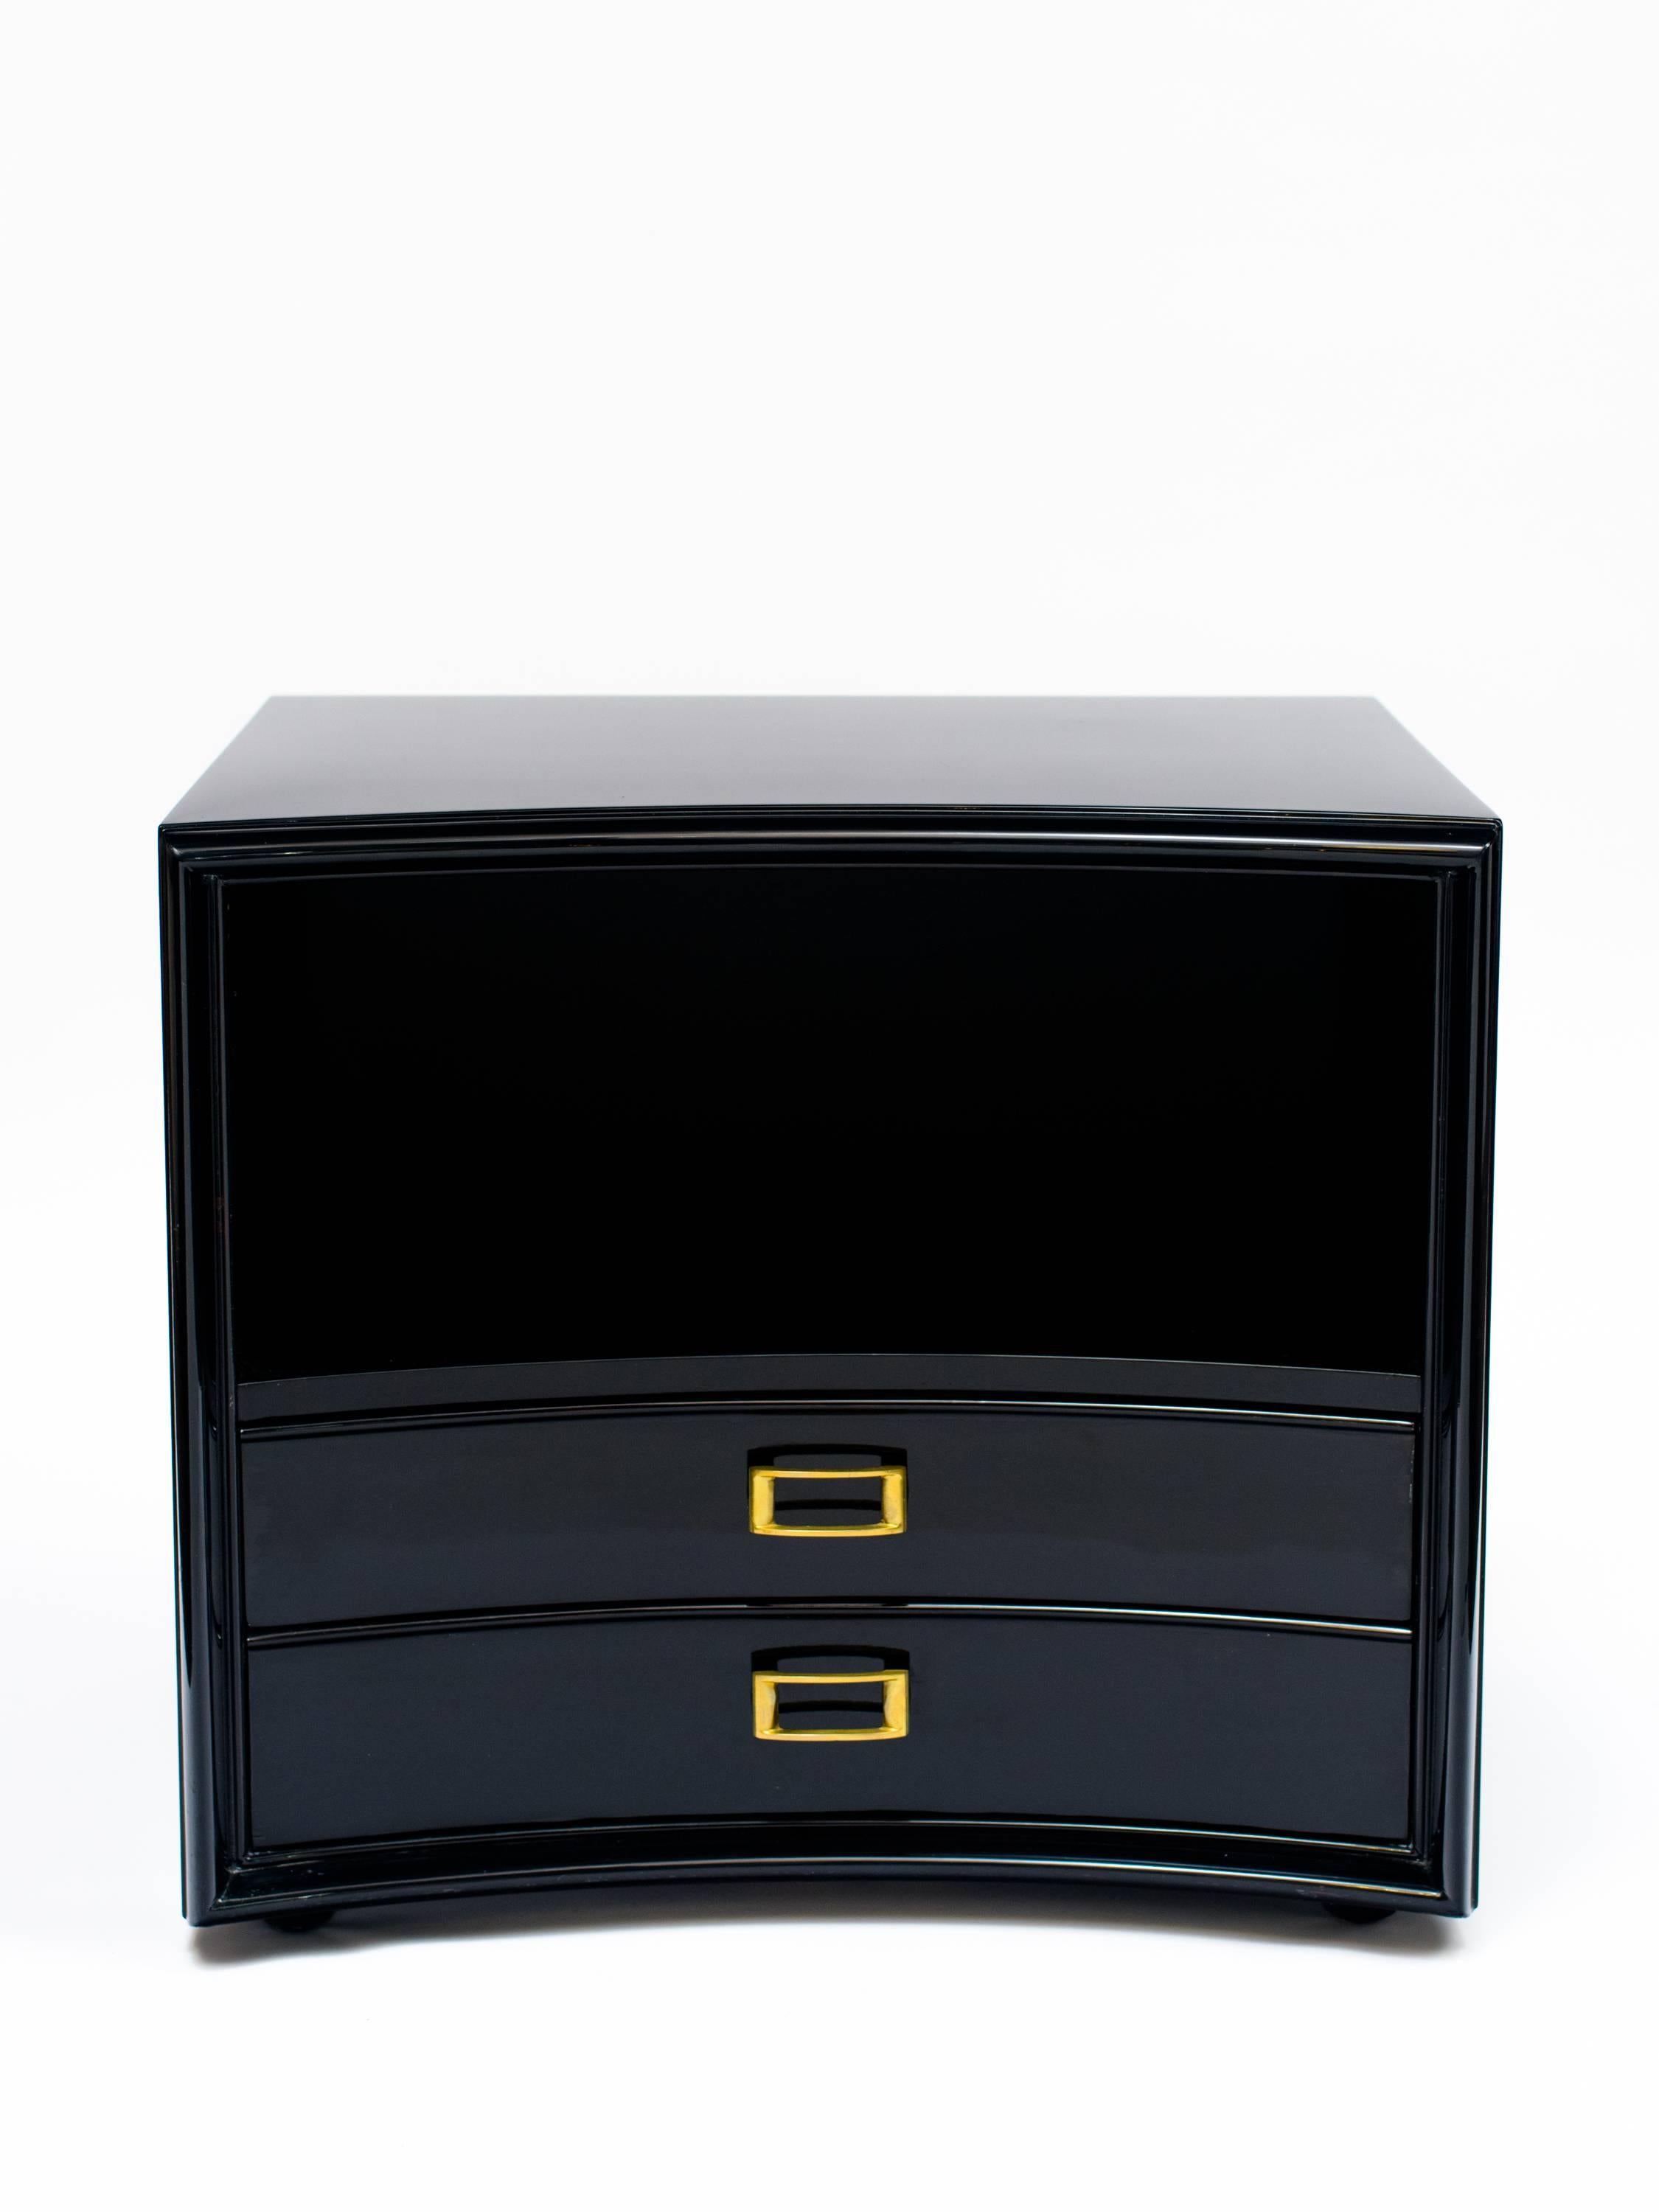 Gorgeous mid-century modern end table or nightstand with bowed front. Has open shelving and display area and is fitted with two lower drawers. Ebonized walnut wood with brass hardware. Designed by Paul Frankl for Johnson Furniture.